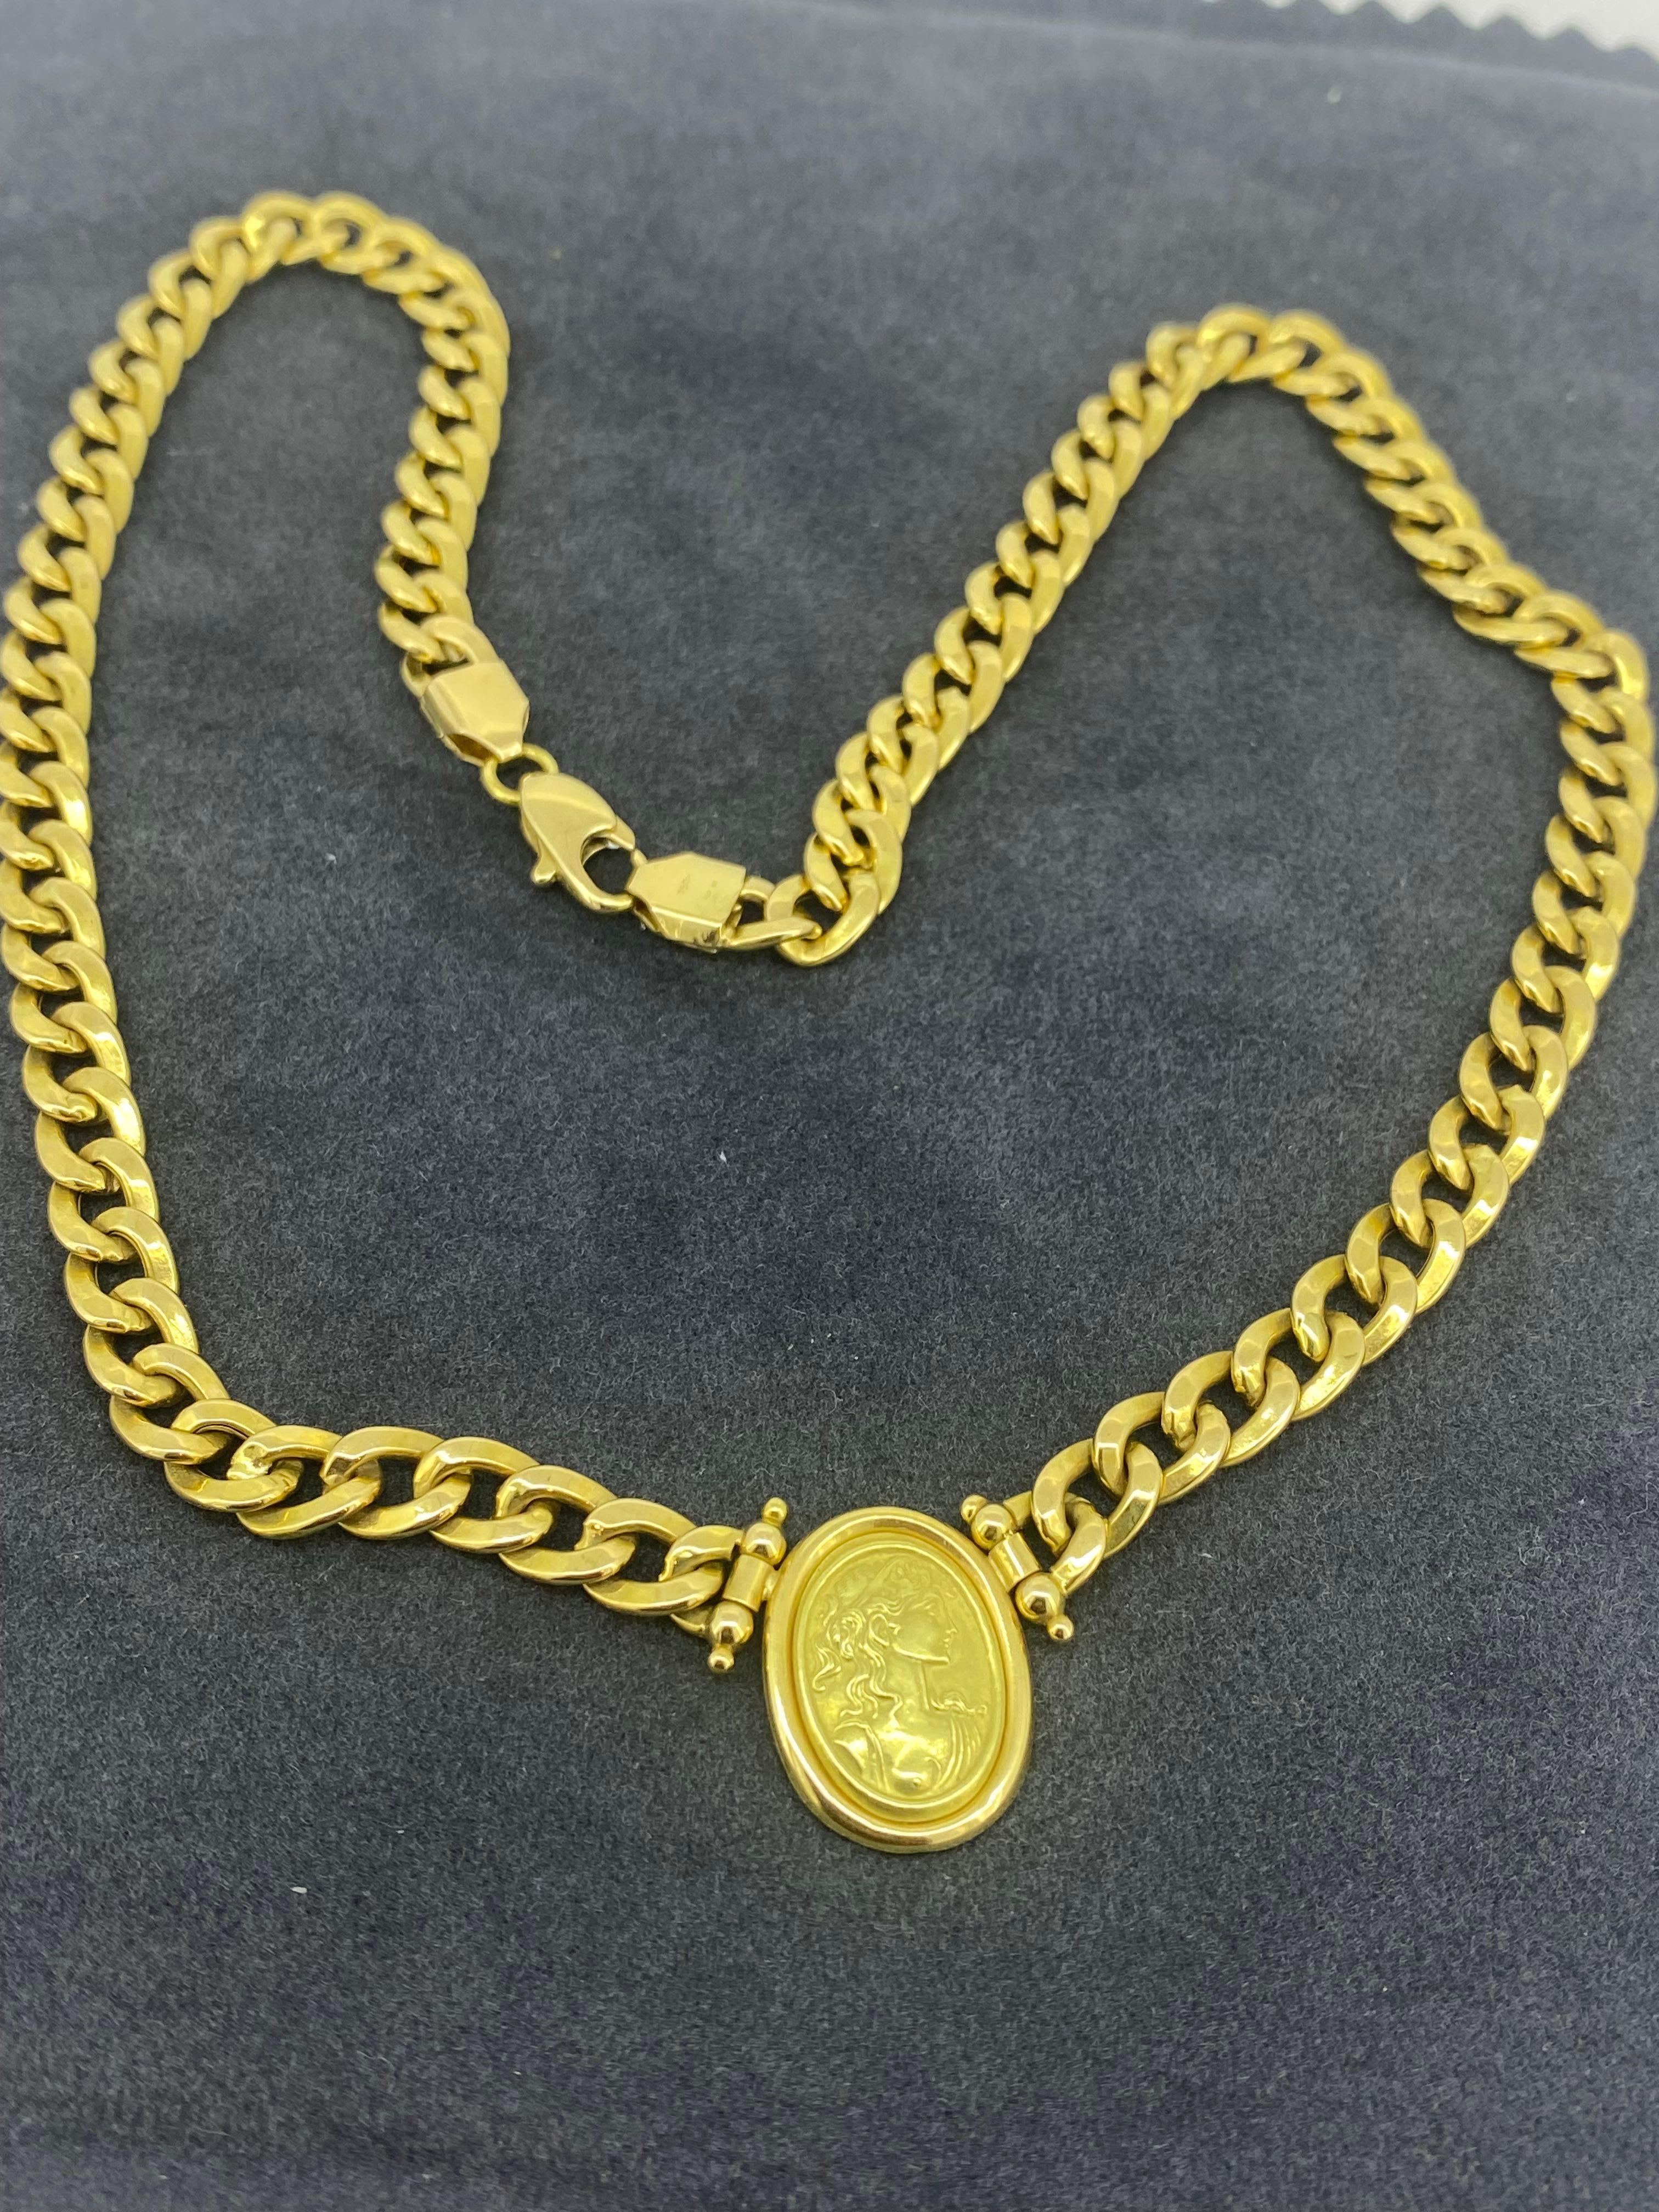 18K Yellow Gold Cameo Pendant Italian Vintage Necklace, Curb Links, 44cm long. For Sale 1